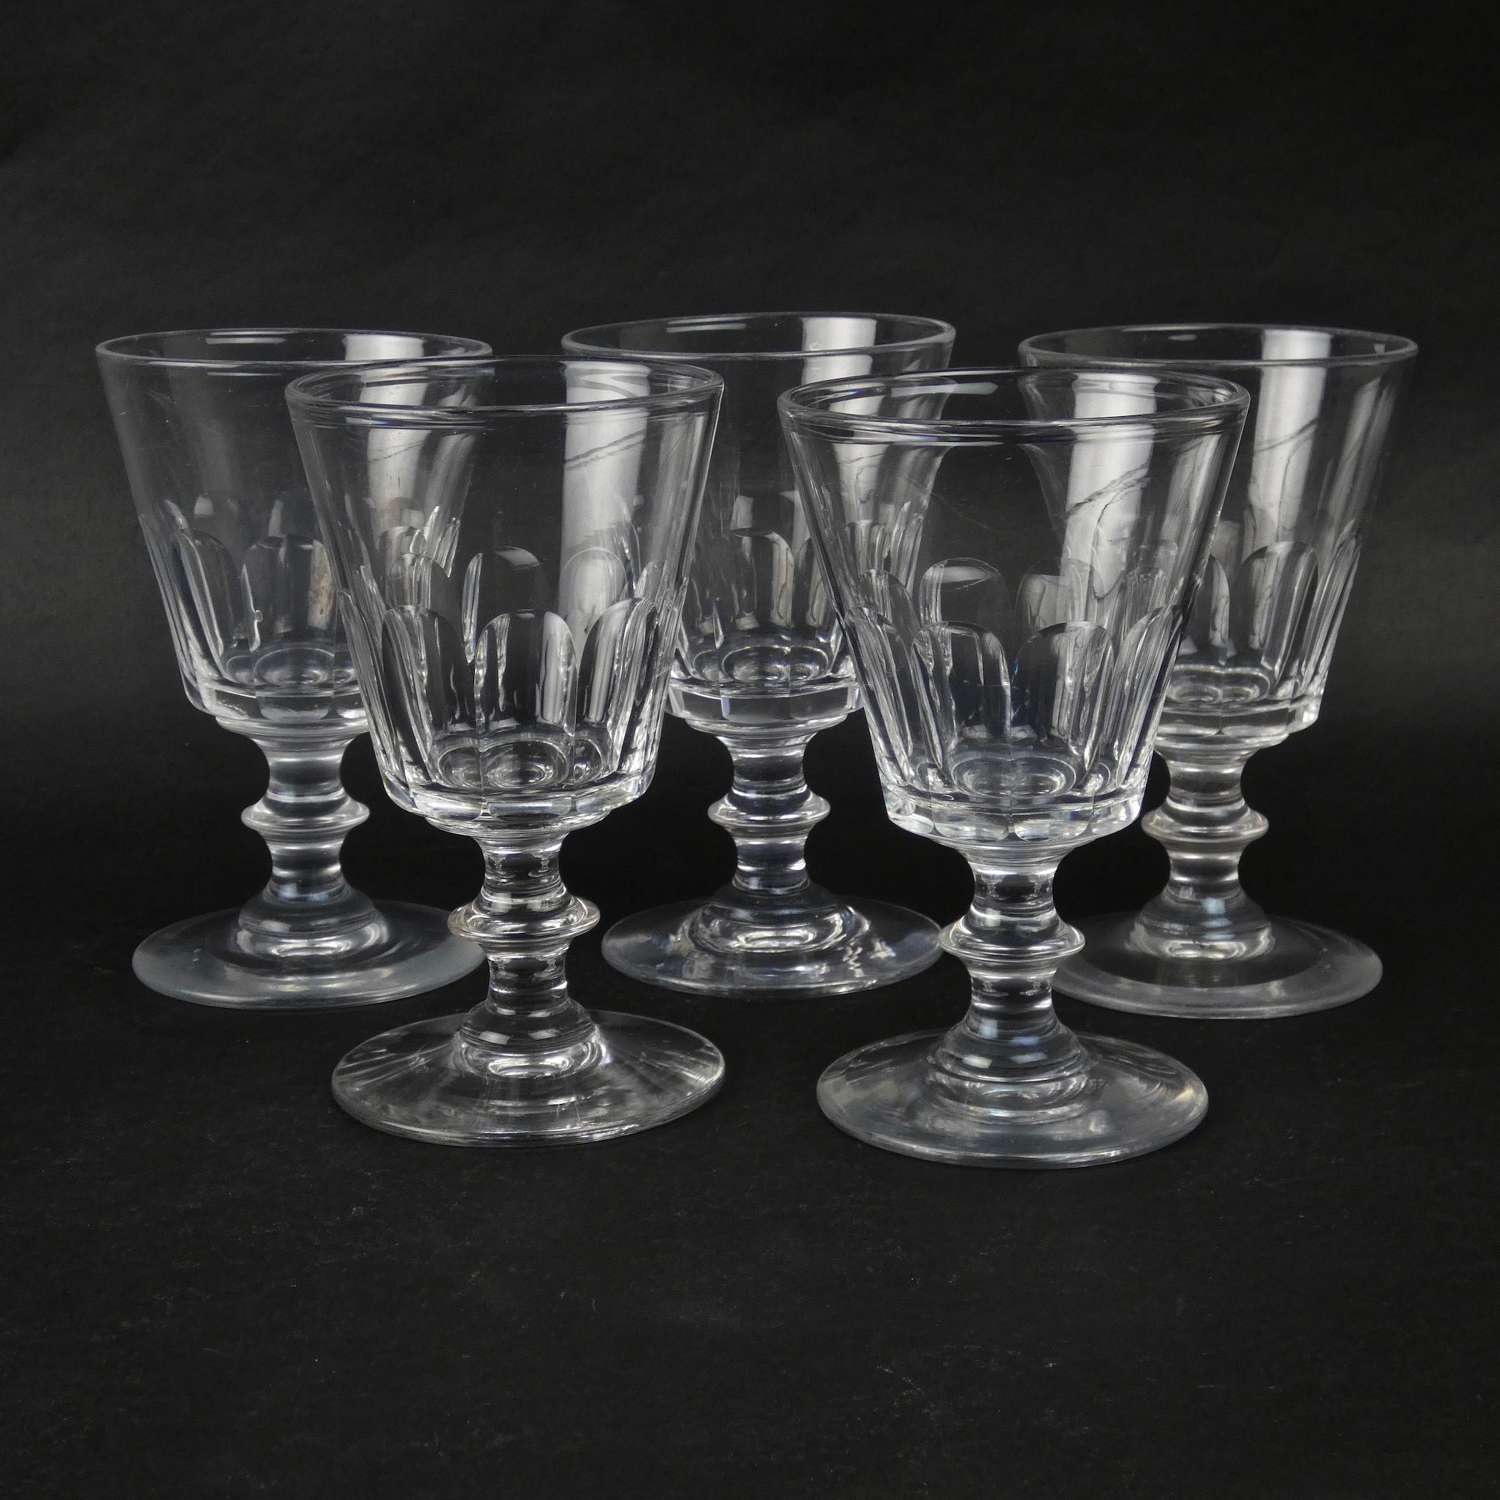 5 heavy, French crystal wine glasses